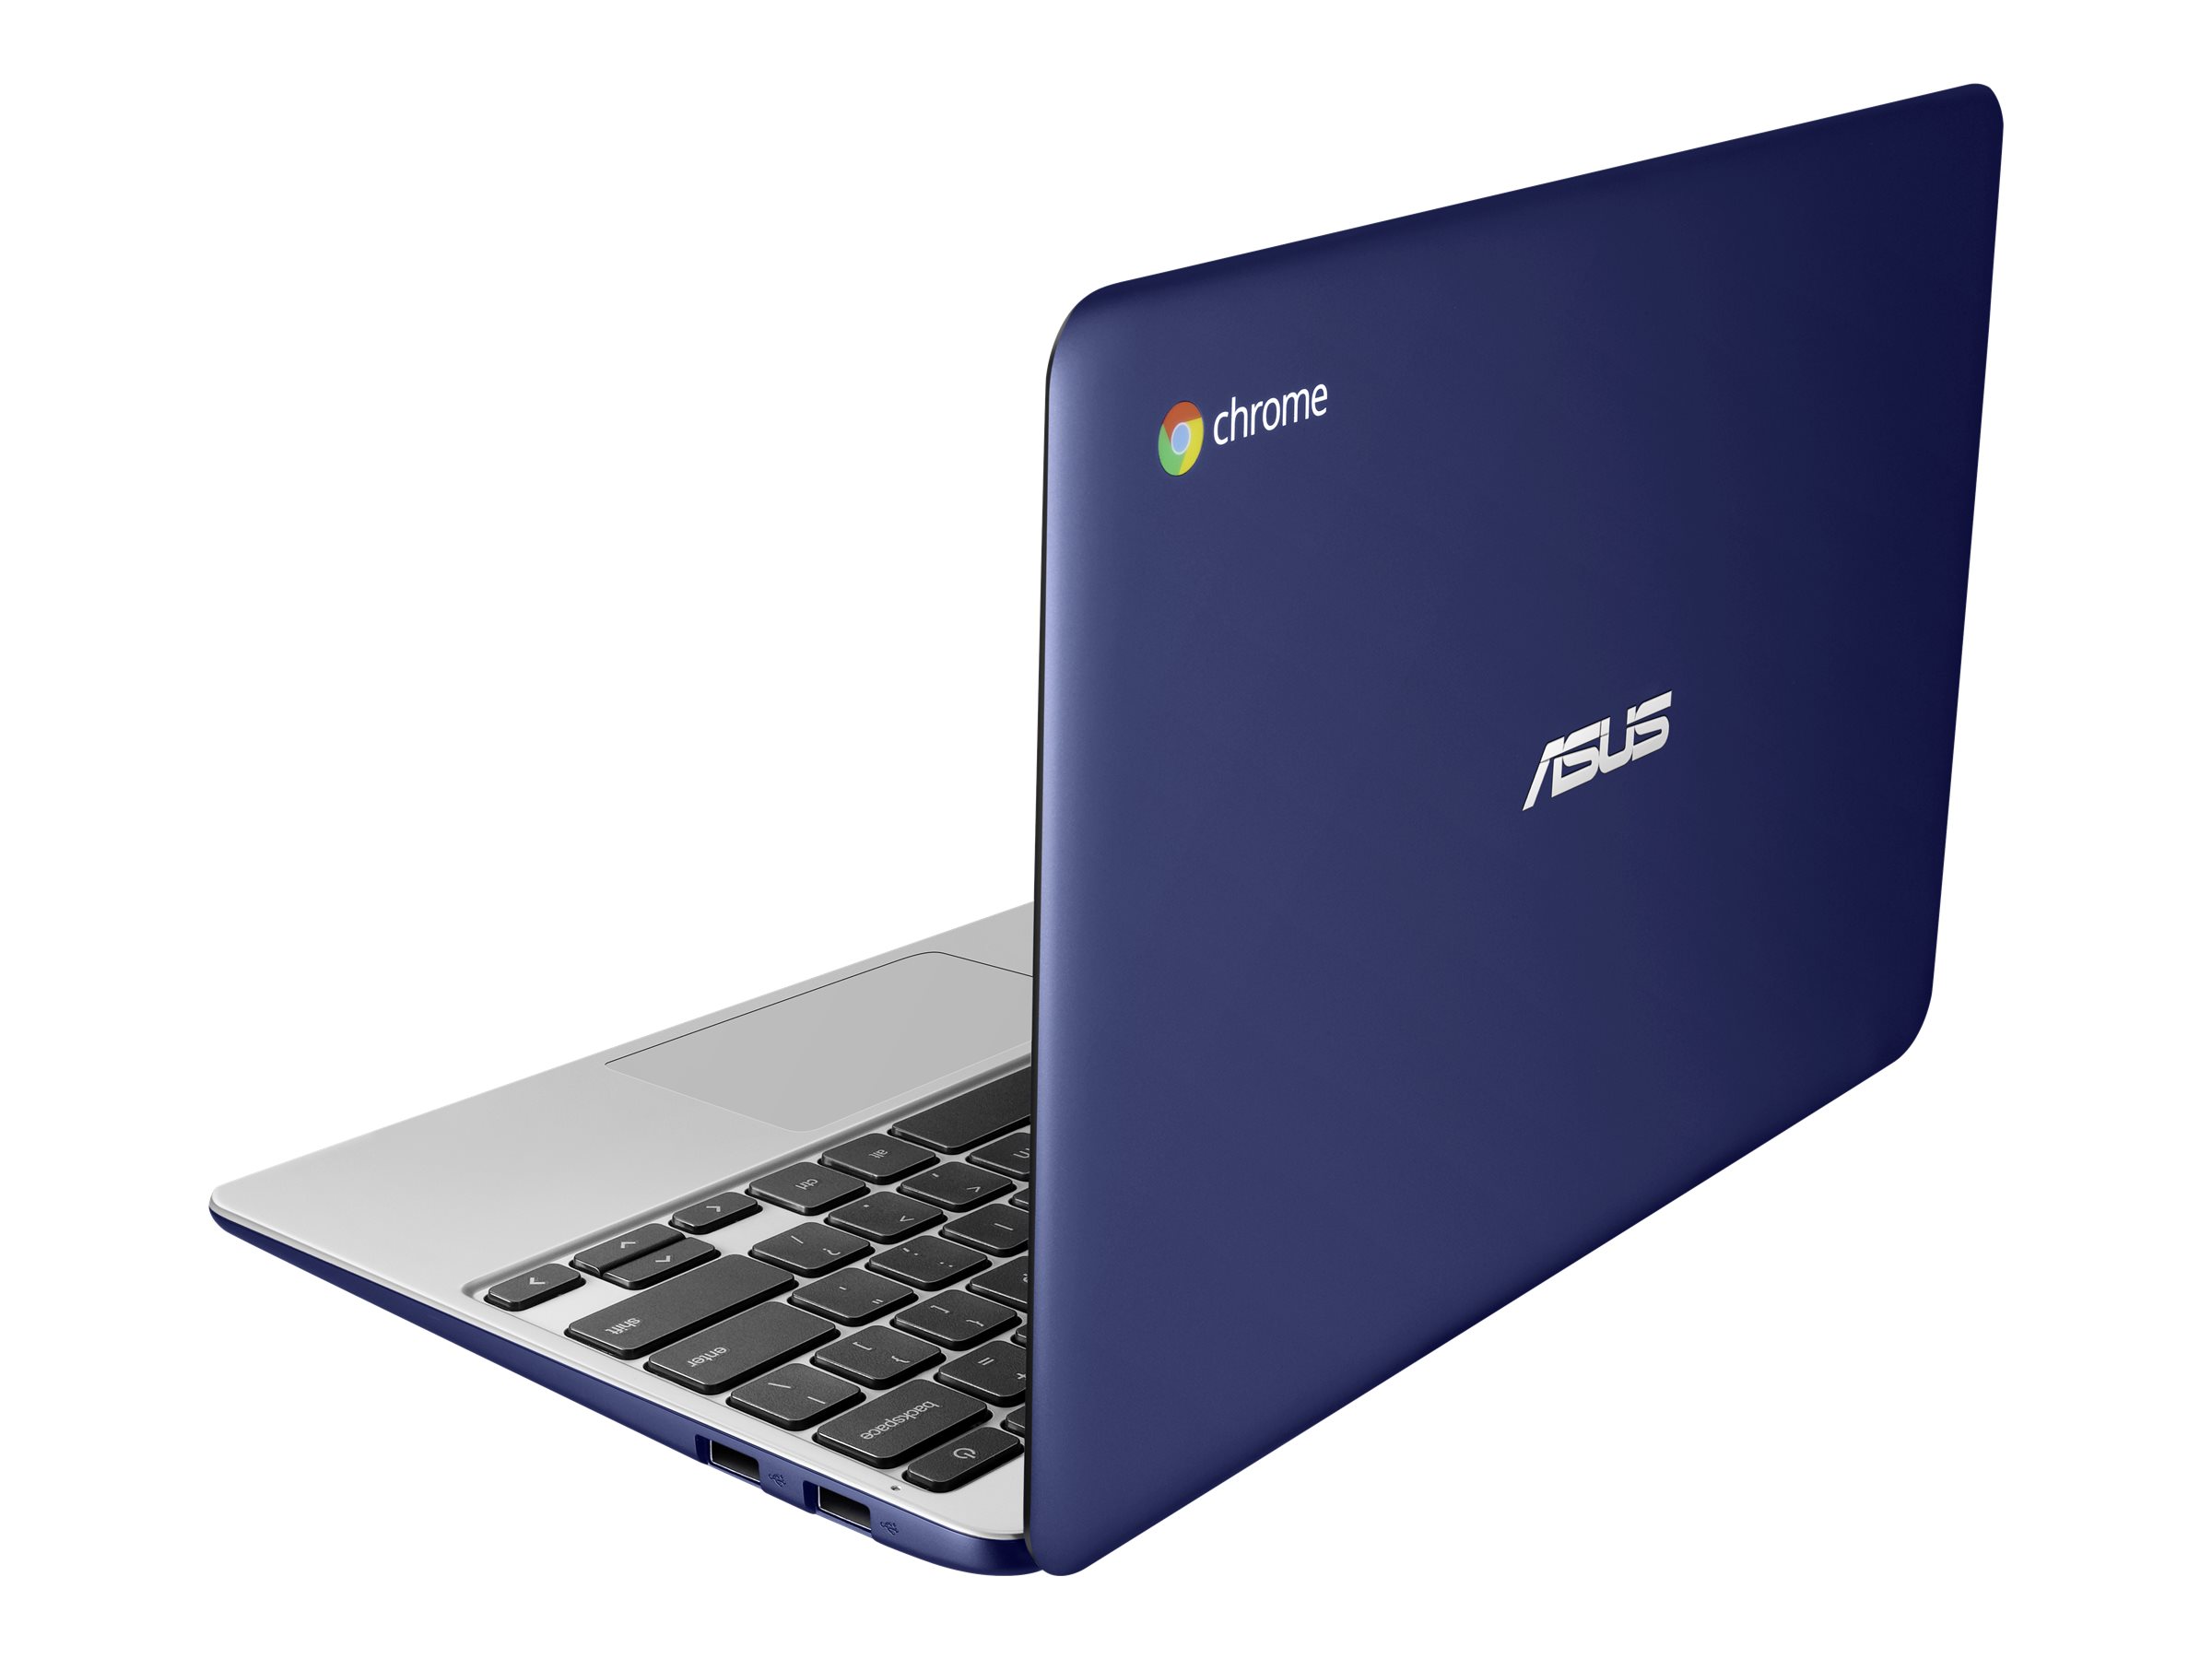 ASUS Chromebook C201PA (FD0008) - pictures, photos and images